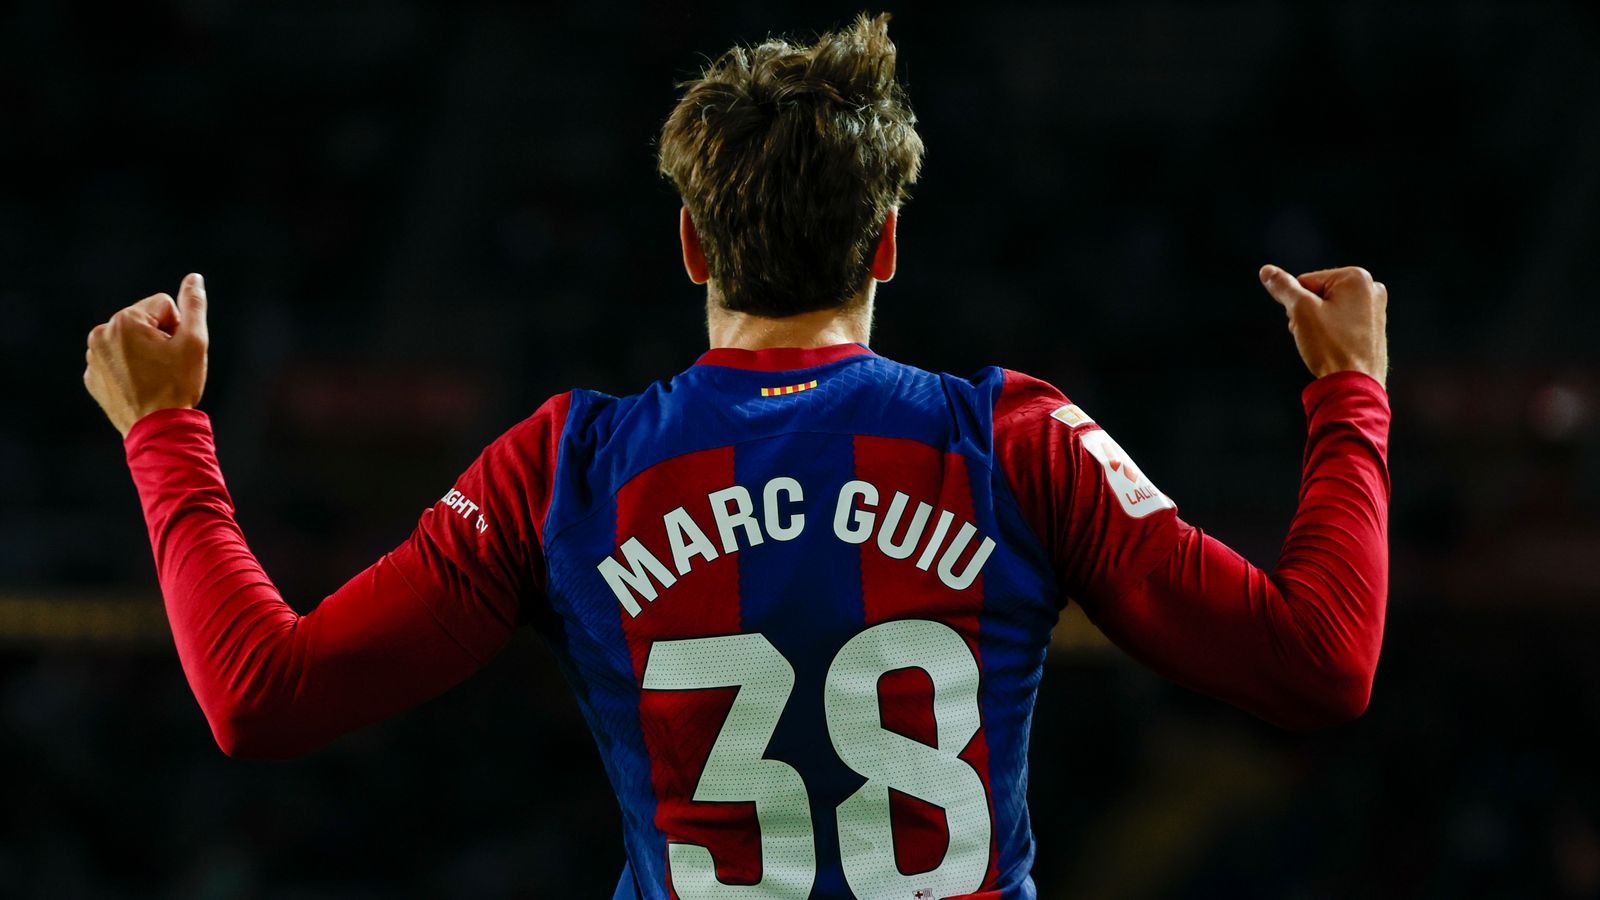  The image shows the back of a young male football player with his arms in the air celebrating with the text on his shirt saying 'Marc Guiu 38'. He is wearing a red and blue striped shirt with the name of the tournament 'European U17 Championship' on his sleeve.